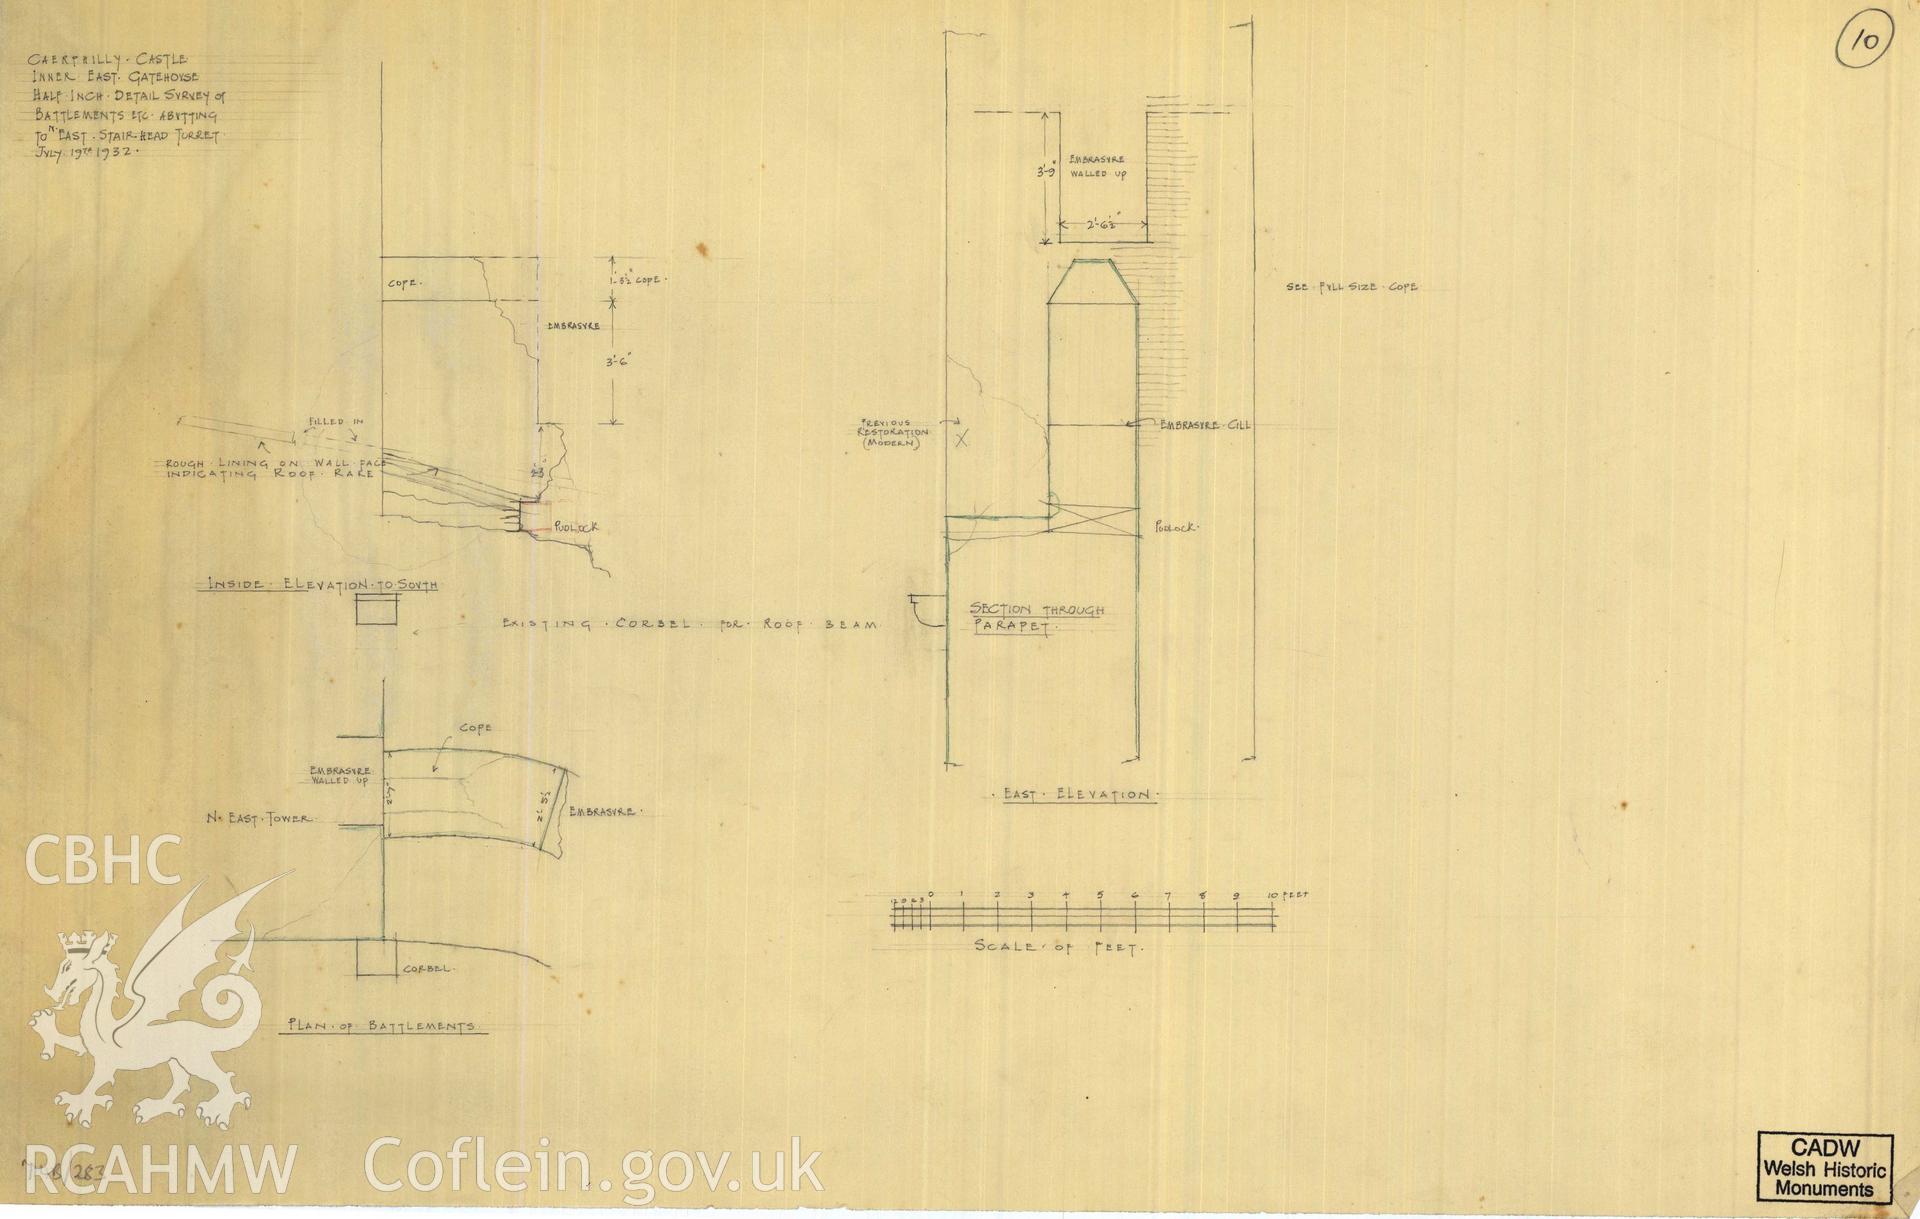 Cadw guardianship monument drawing of Caerphilly Castle. Inner E gate, N turret battlement. Cadw Ref. No:714B/283. Scale 1:24.